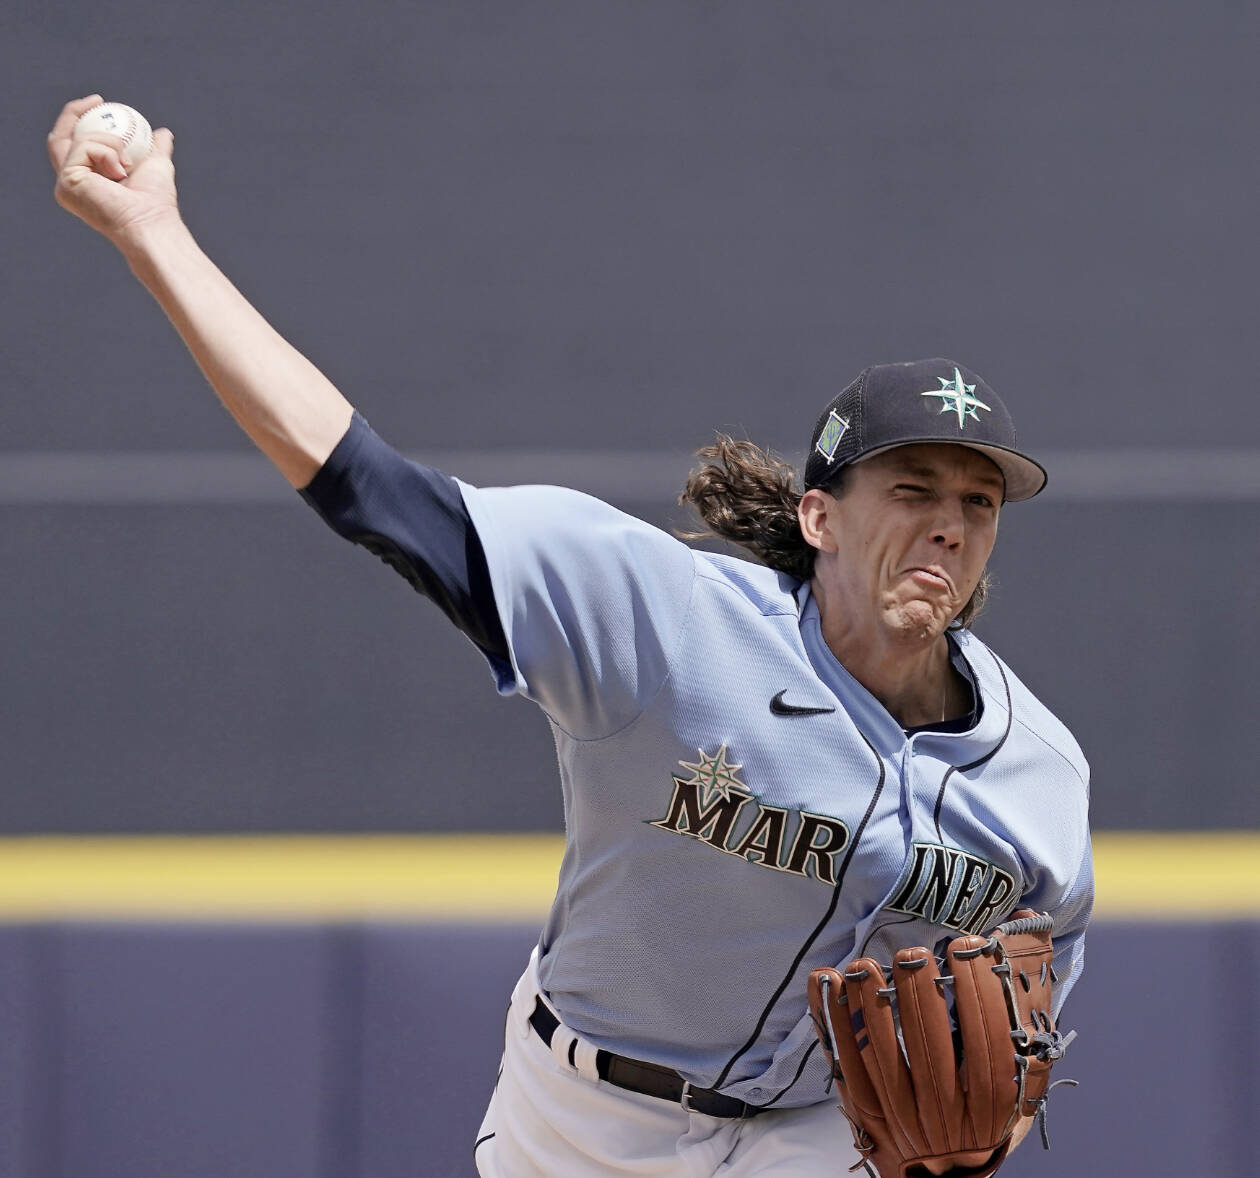 Seattle Mariners starting pitcher Logan Gilbert throws during the first inning of a spring training baseball game against the Kansas City Royals Tuesday, March 29, 2022, in Peoria, Ariz. (Charlie Riedel/The Associated Press)